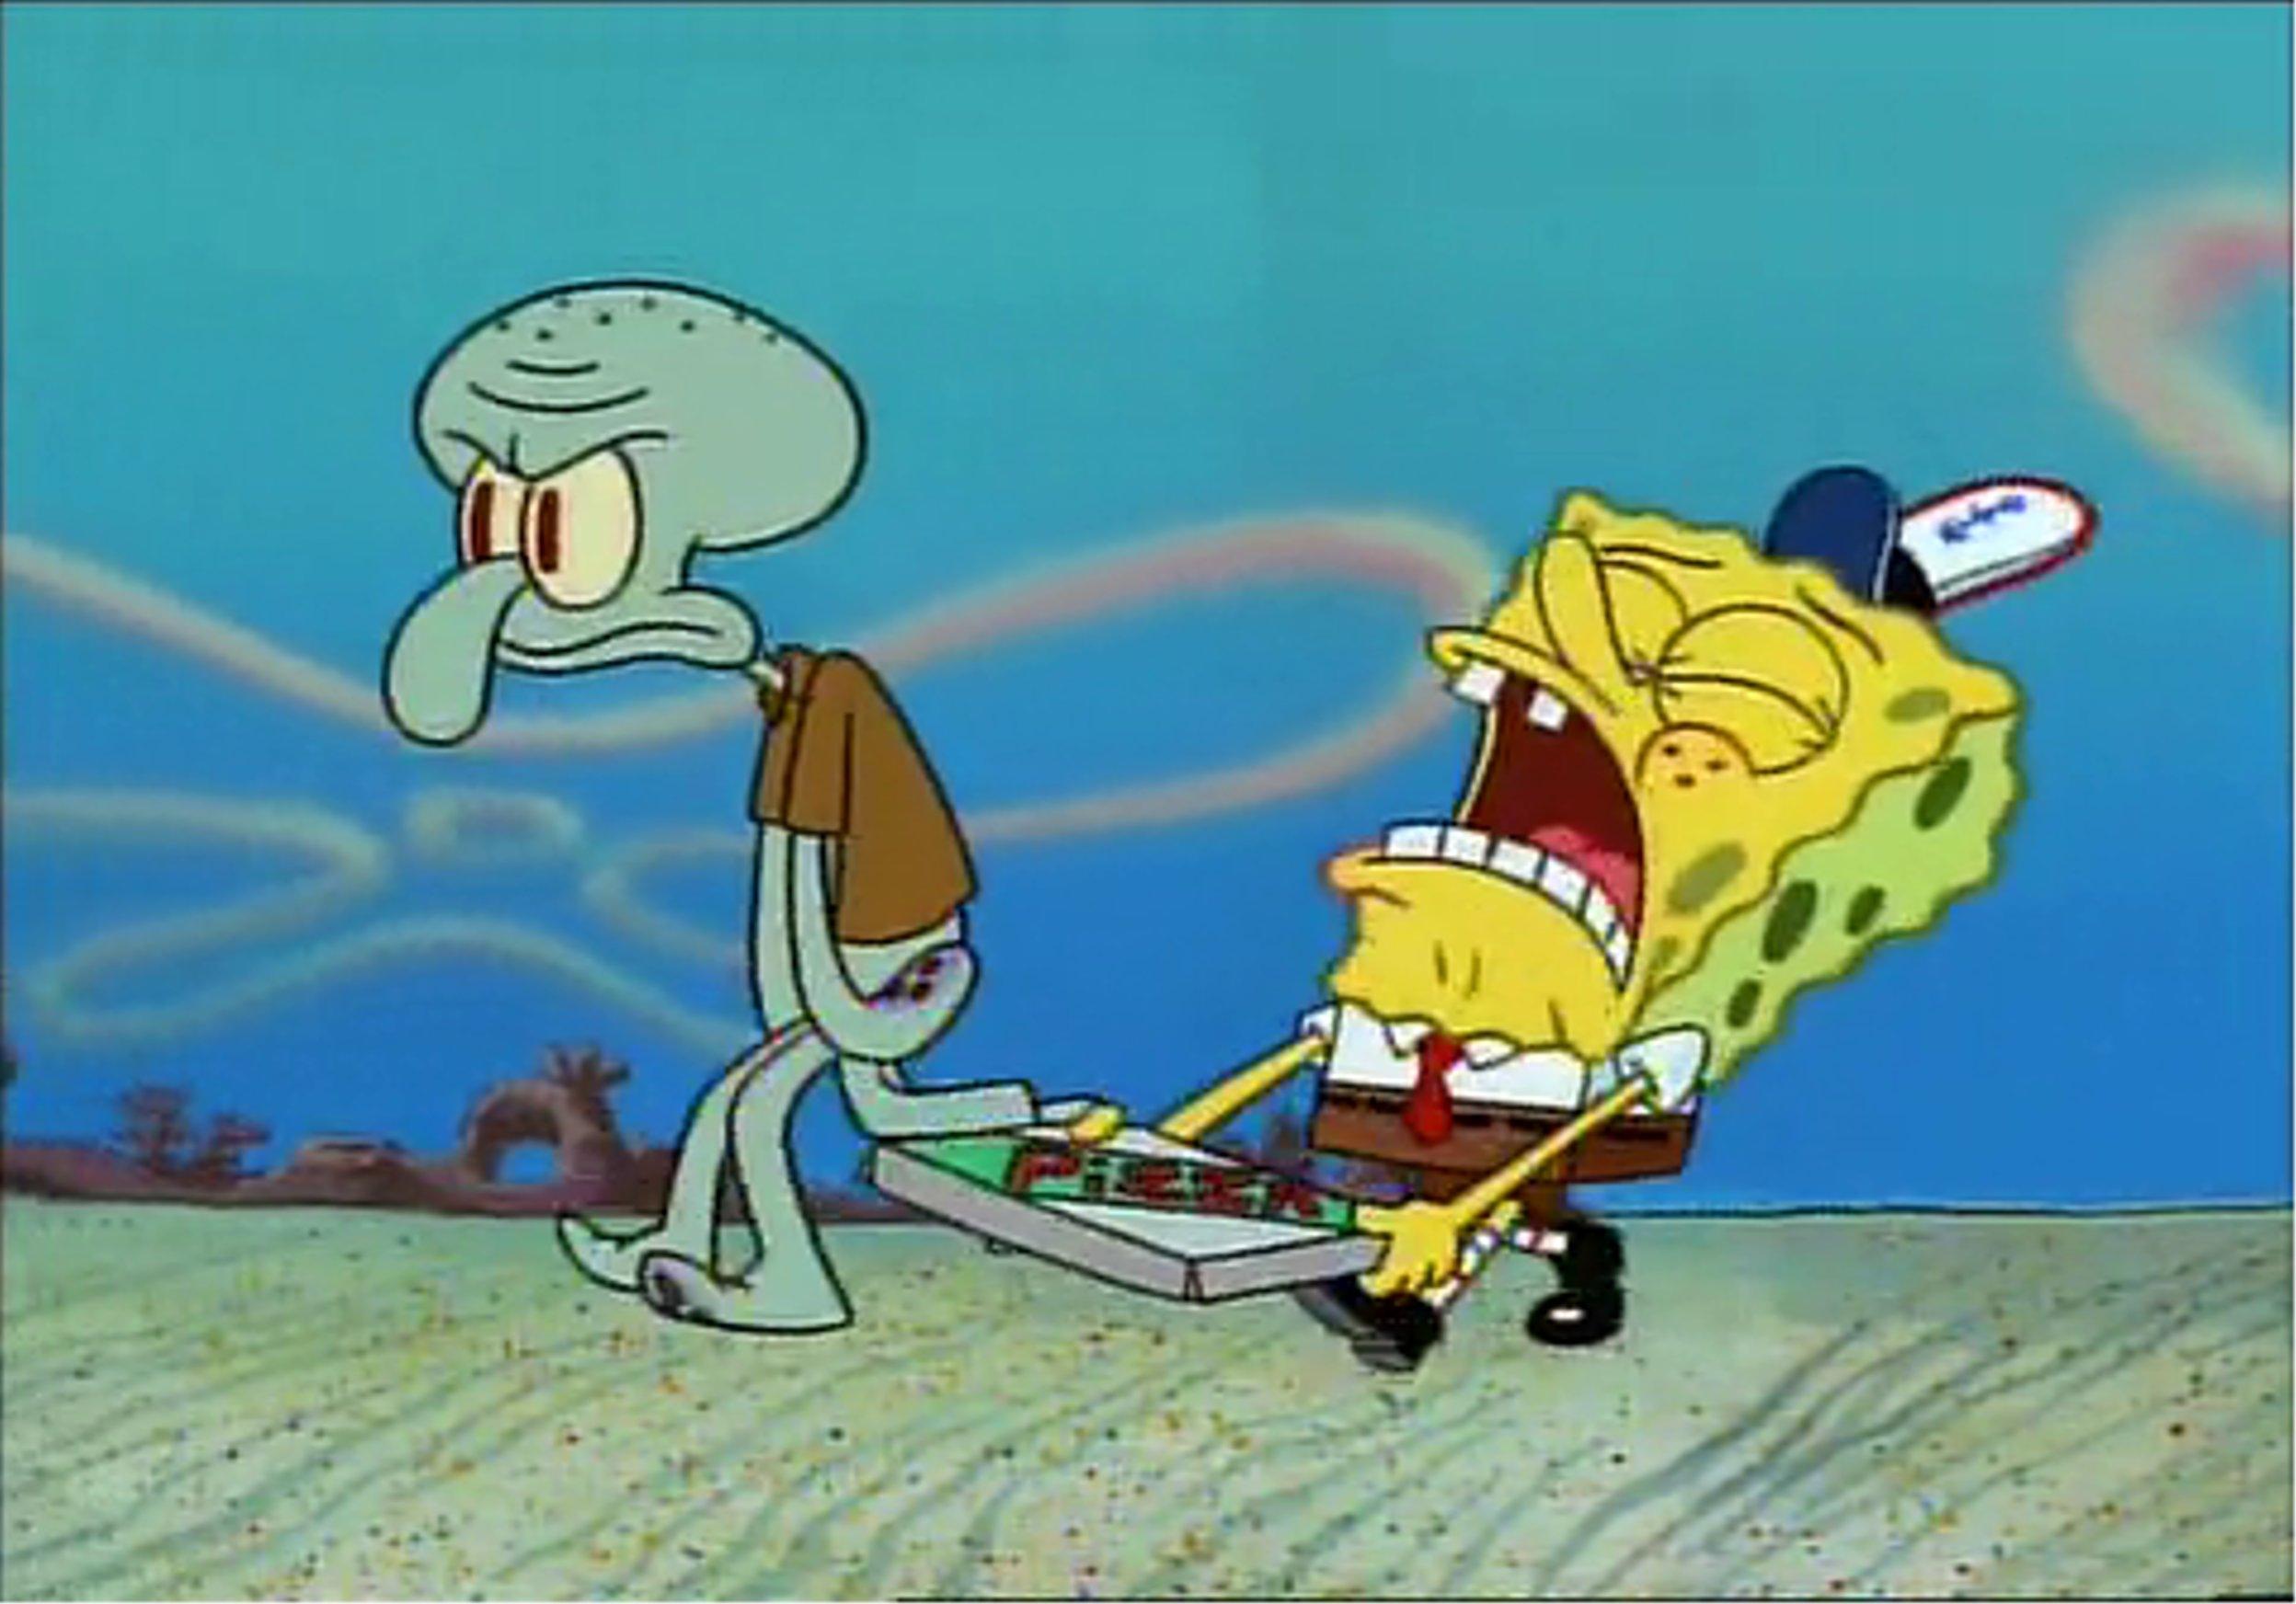 The krusty Krab pizza is the pizza for you and me